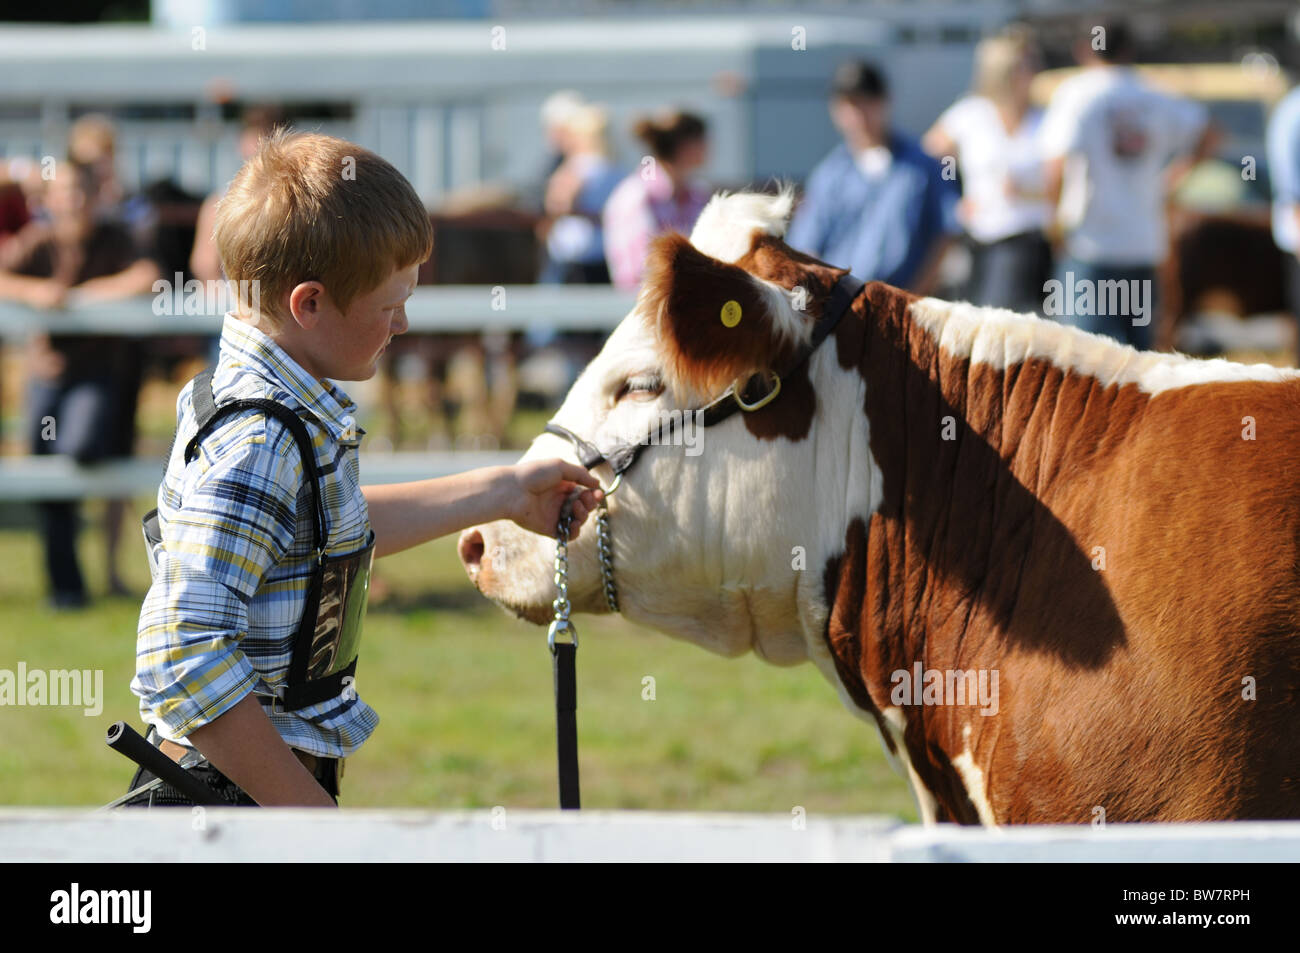 young boy showing his cow at a rural agricultural fair Stock Photo